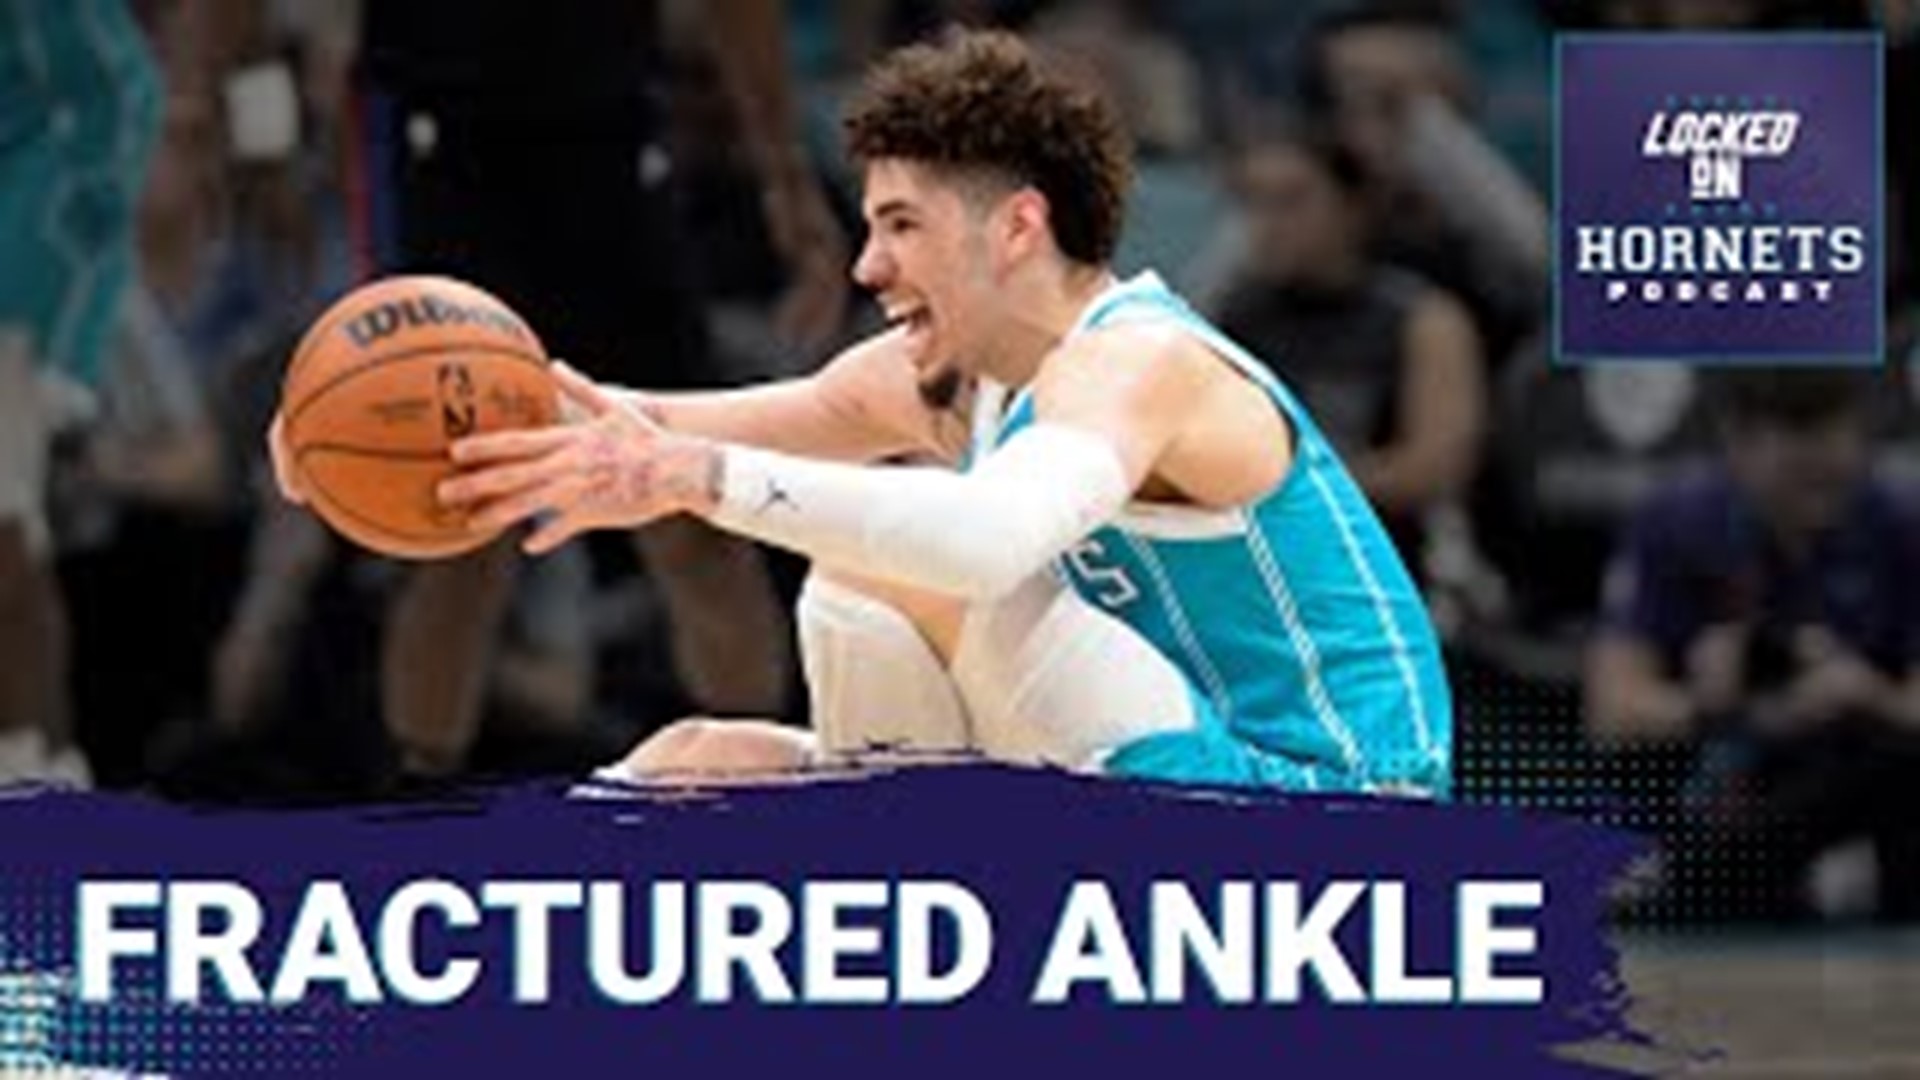 LaMelo Ball out for season with ankle injury NBA news wcnc